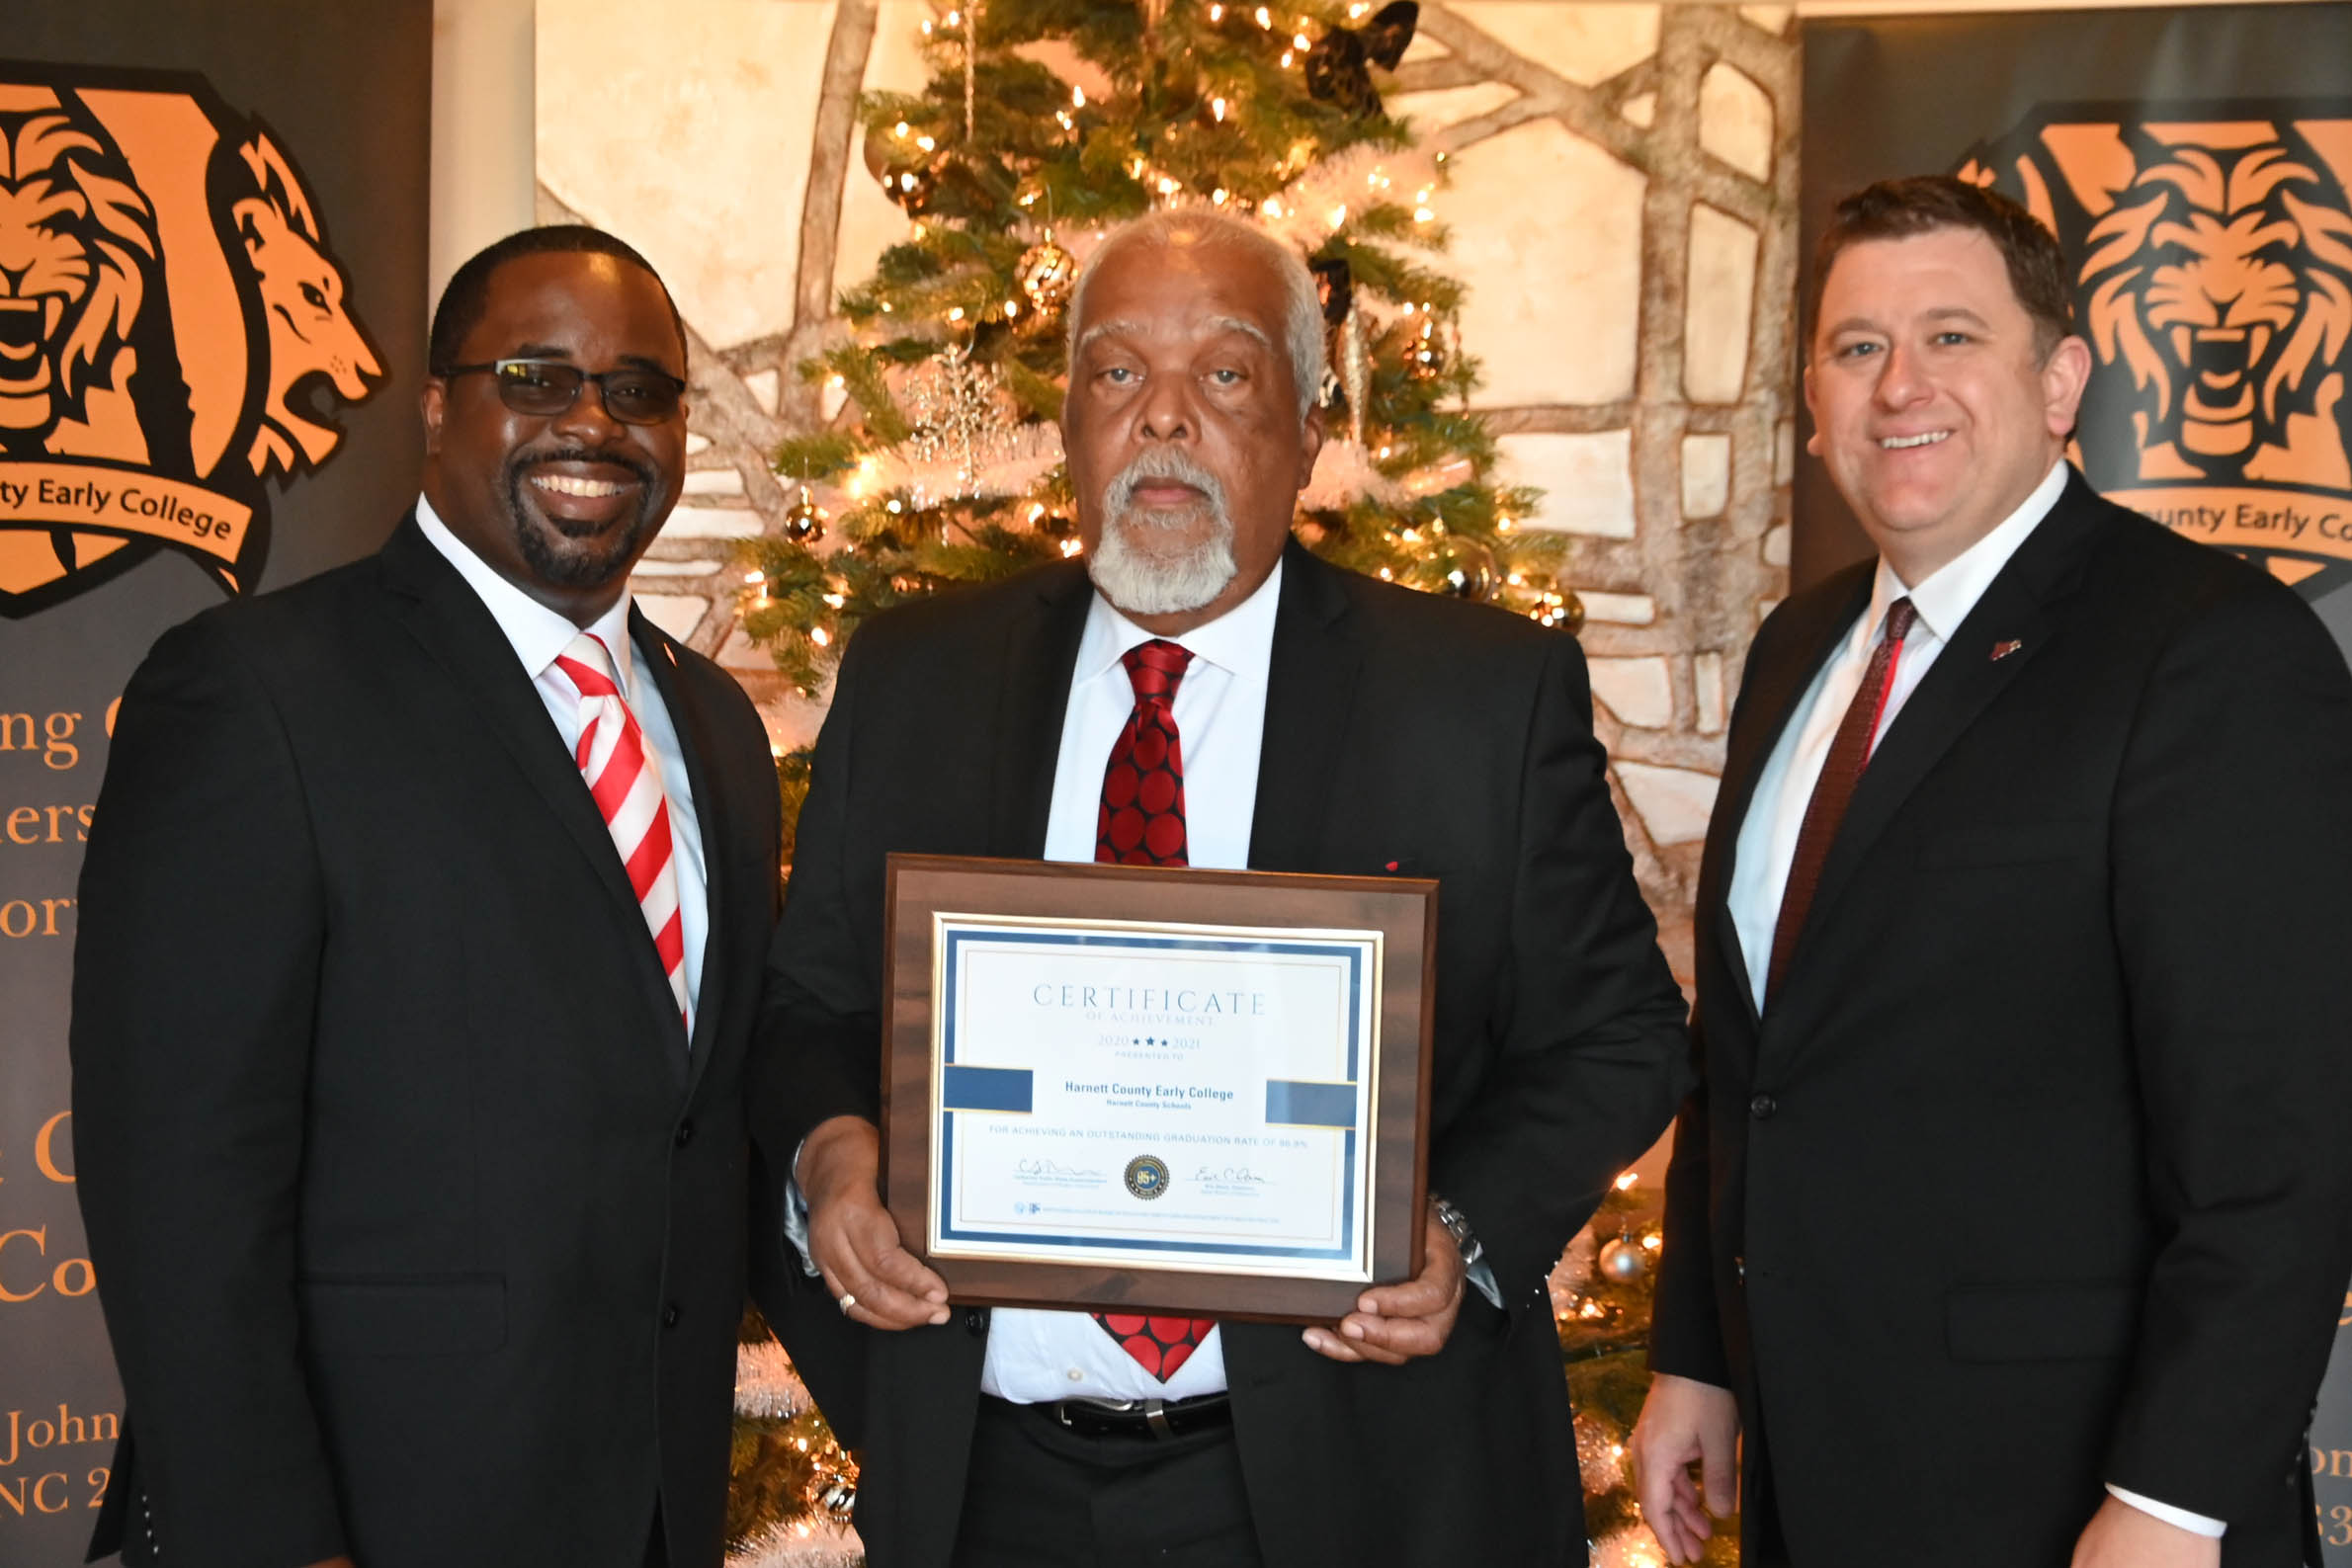 Click to enlarge,  Harnett County Early College was recognized by the N.C. Department of Public Instruction for achieving an outstanding graduation rate of 96.9 percent in 2020-2021. Pictured with a certificate recognizing the honor are, left to right: Jermaine White, Harnett County Schools Assistant Superintendent of Student Services; Walter McPherson, Principal at Harnett County Early College, and Dr. Aaron L. Fleming, Harnett County Schools Superintendent. 